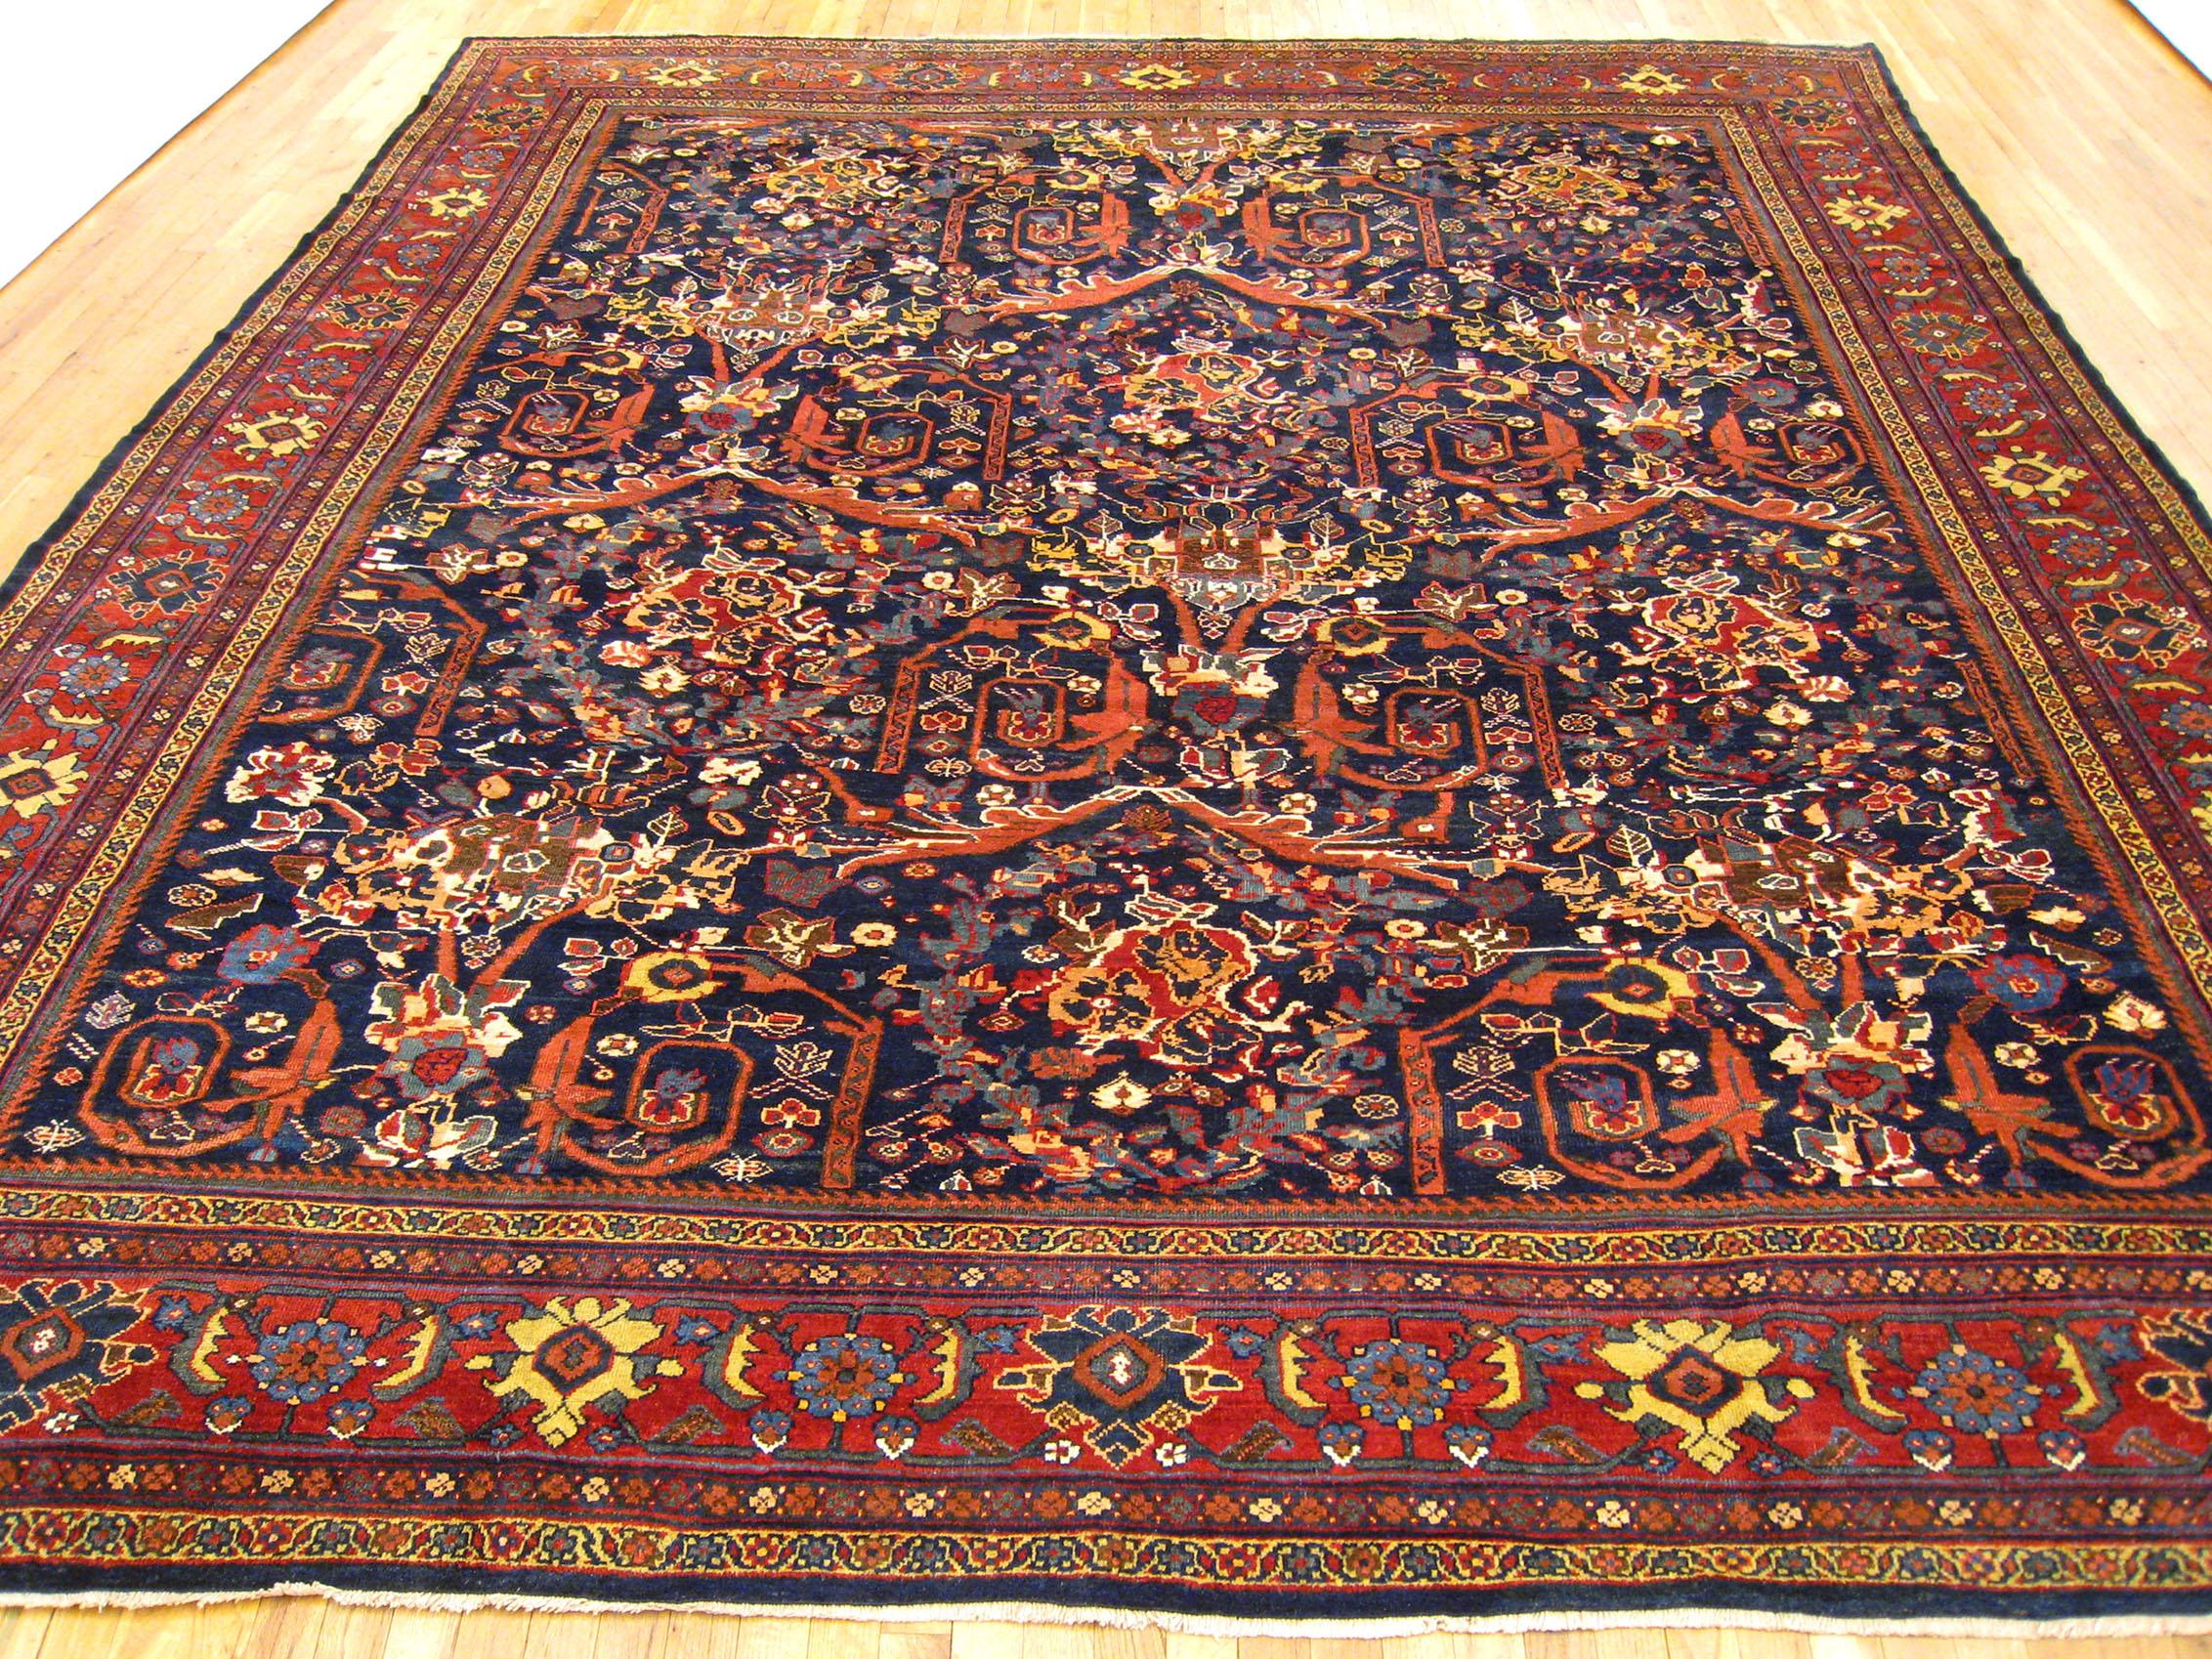 Antique Persian Sultanabad rug, room size, circa 1920

A one-of-a-kind antique Persian Sultanabad oriental carpet, hand-knotted with short wool pile. This lovely hand-knotted carpet features a mostophy design allover a navy primary field, with a